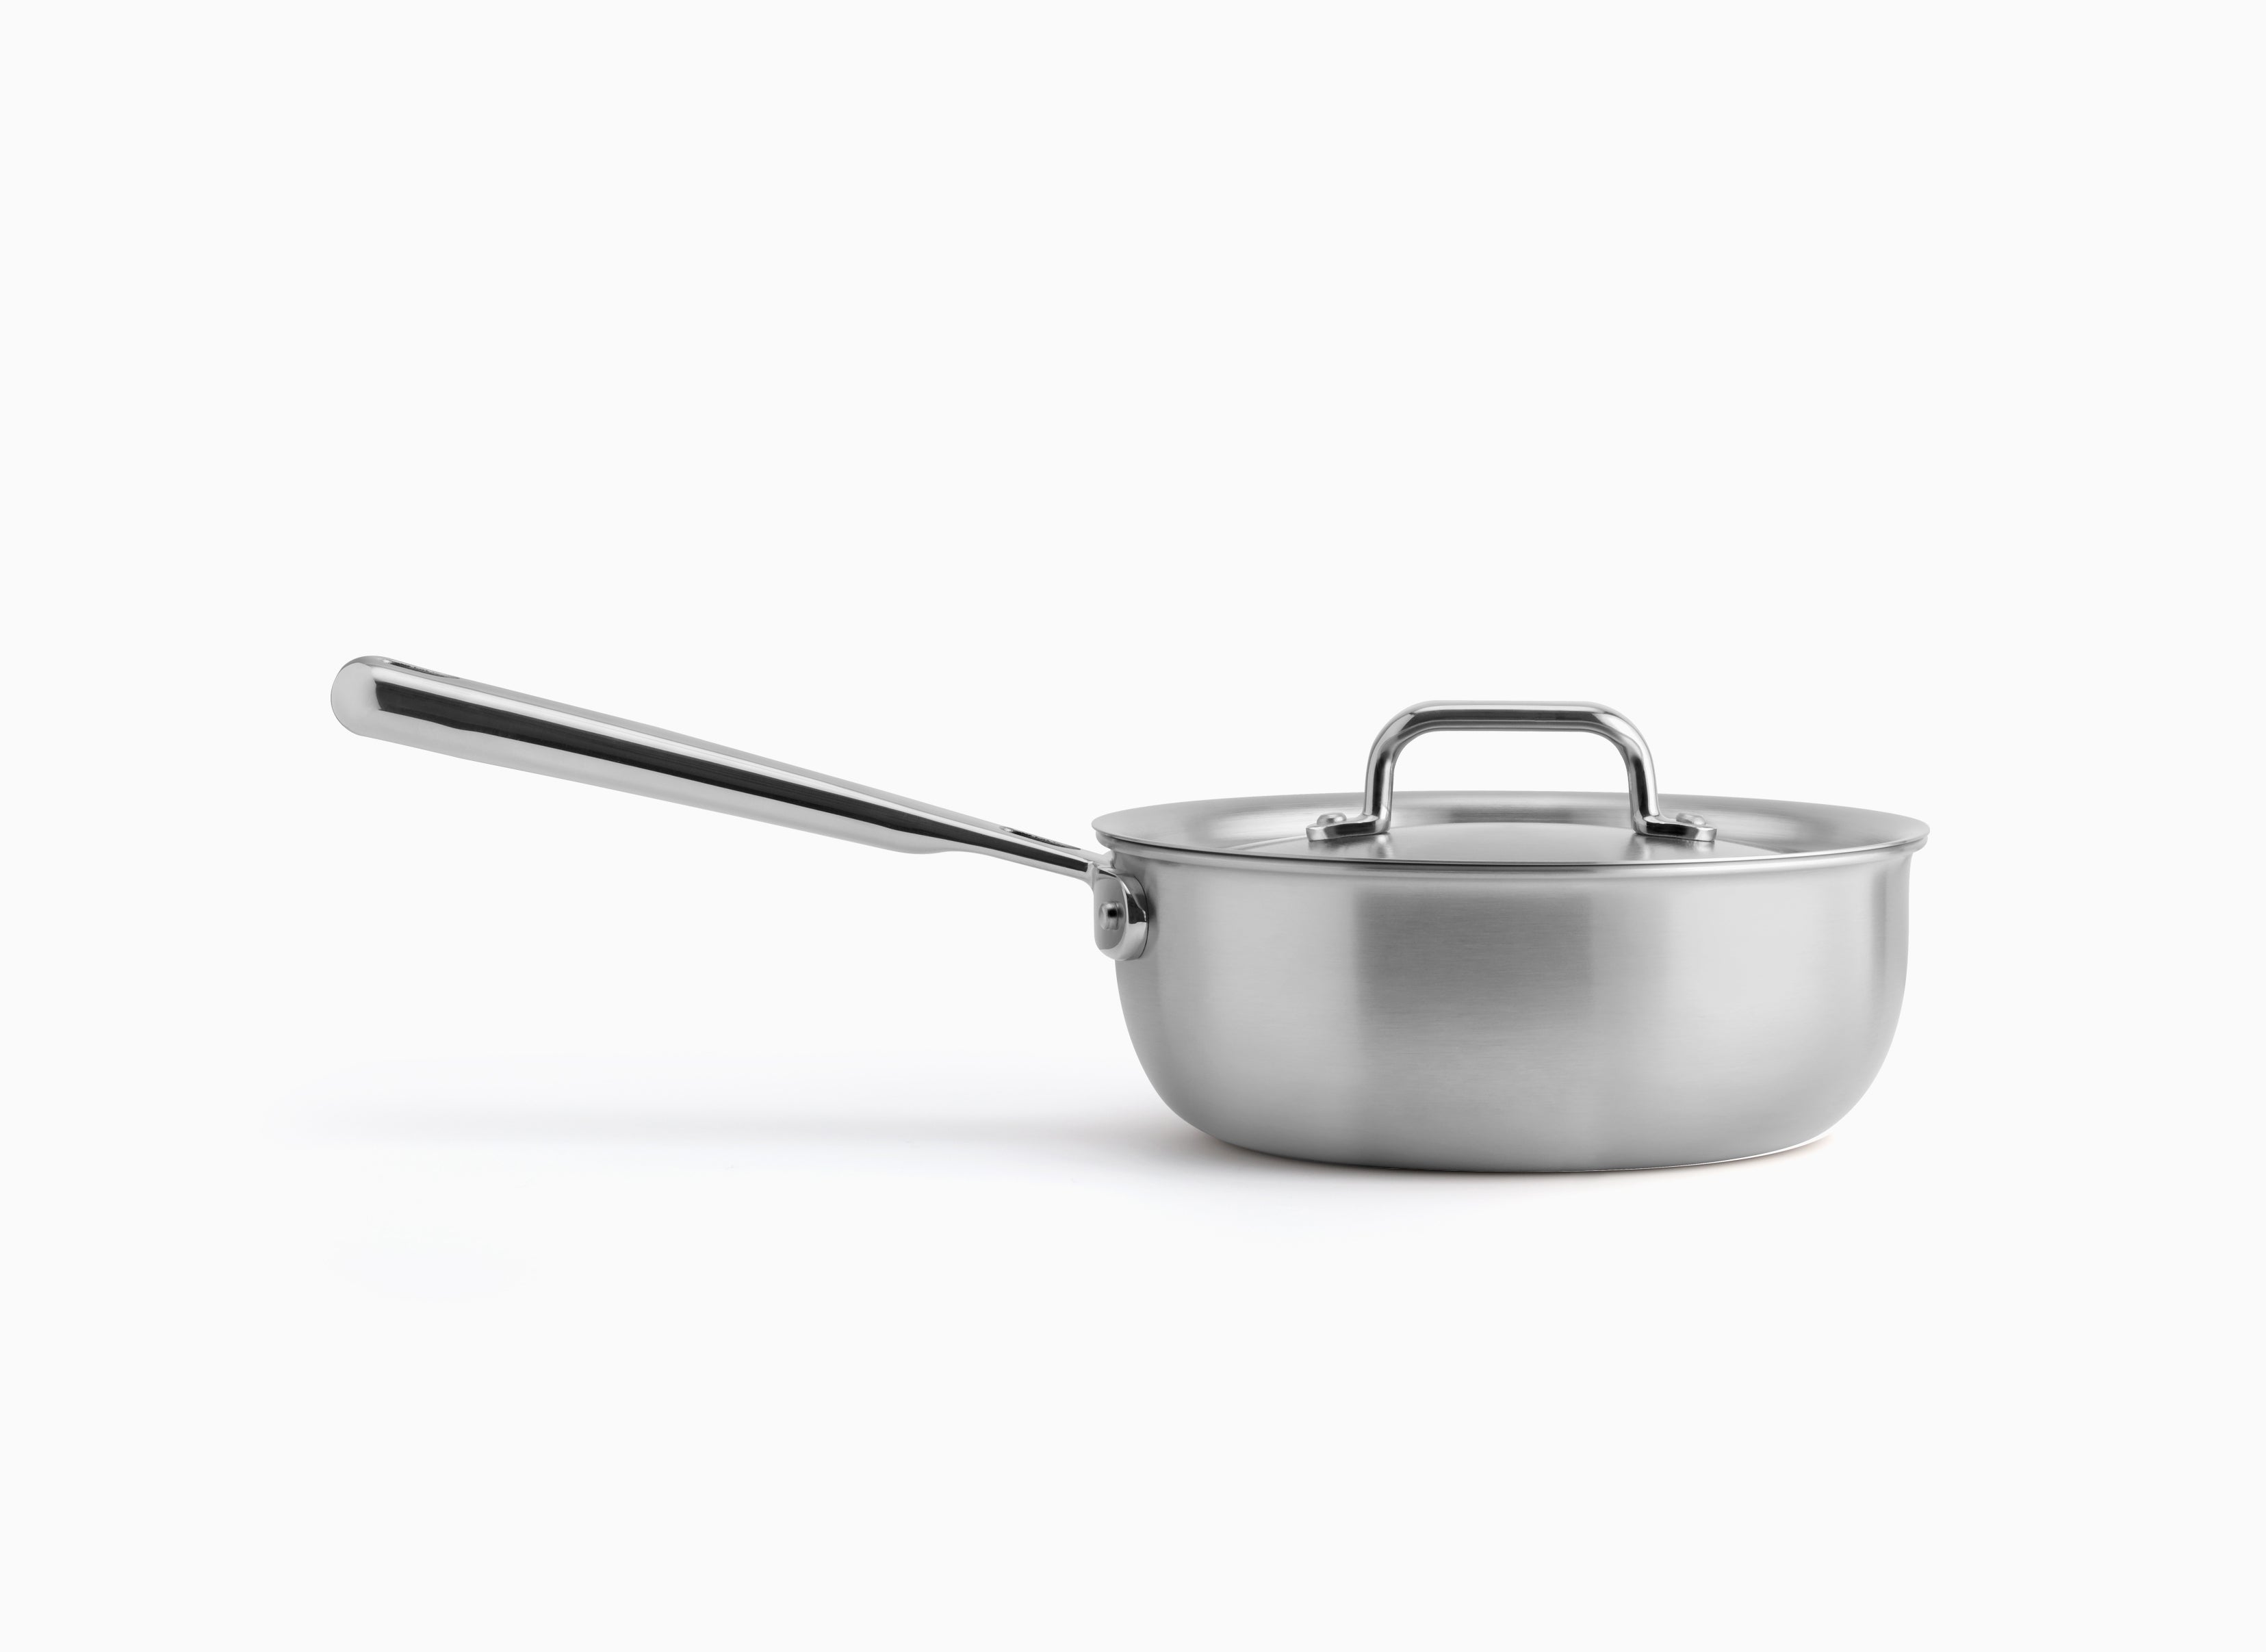  Misen 5-Ply Stainless Steel Cookware Set: 3 QT Stainless Steel  Saucier with Lid, 3 QT Saute Pan with Lid & 10 Frying Pan - Excellent  Searing, Sauteing & Everyday Cooking 12-Piece